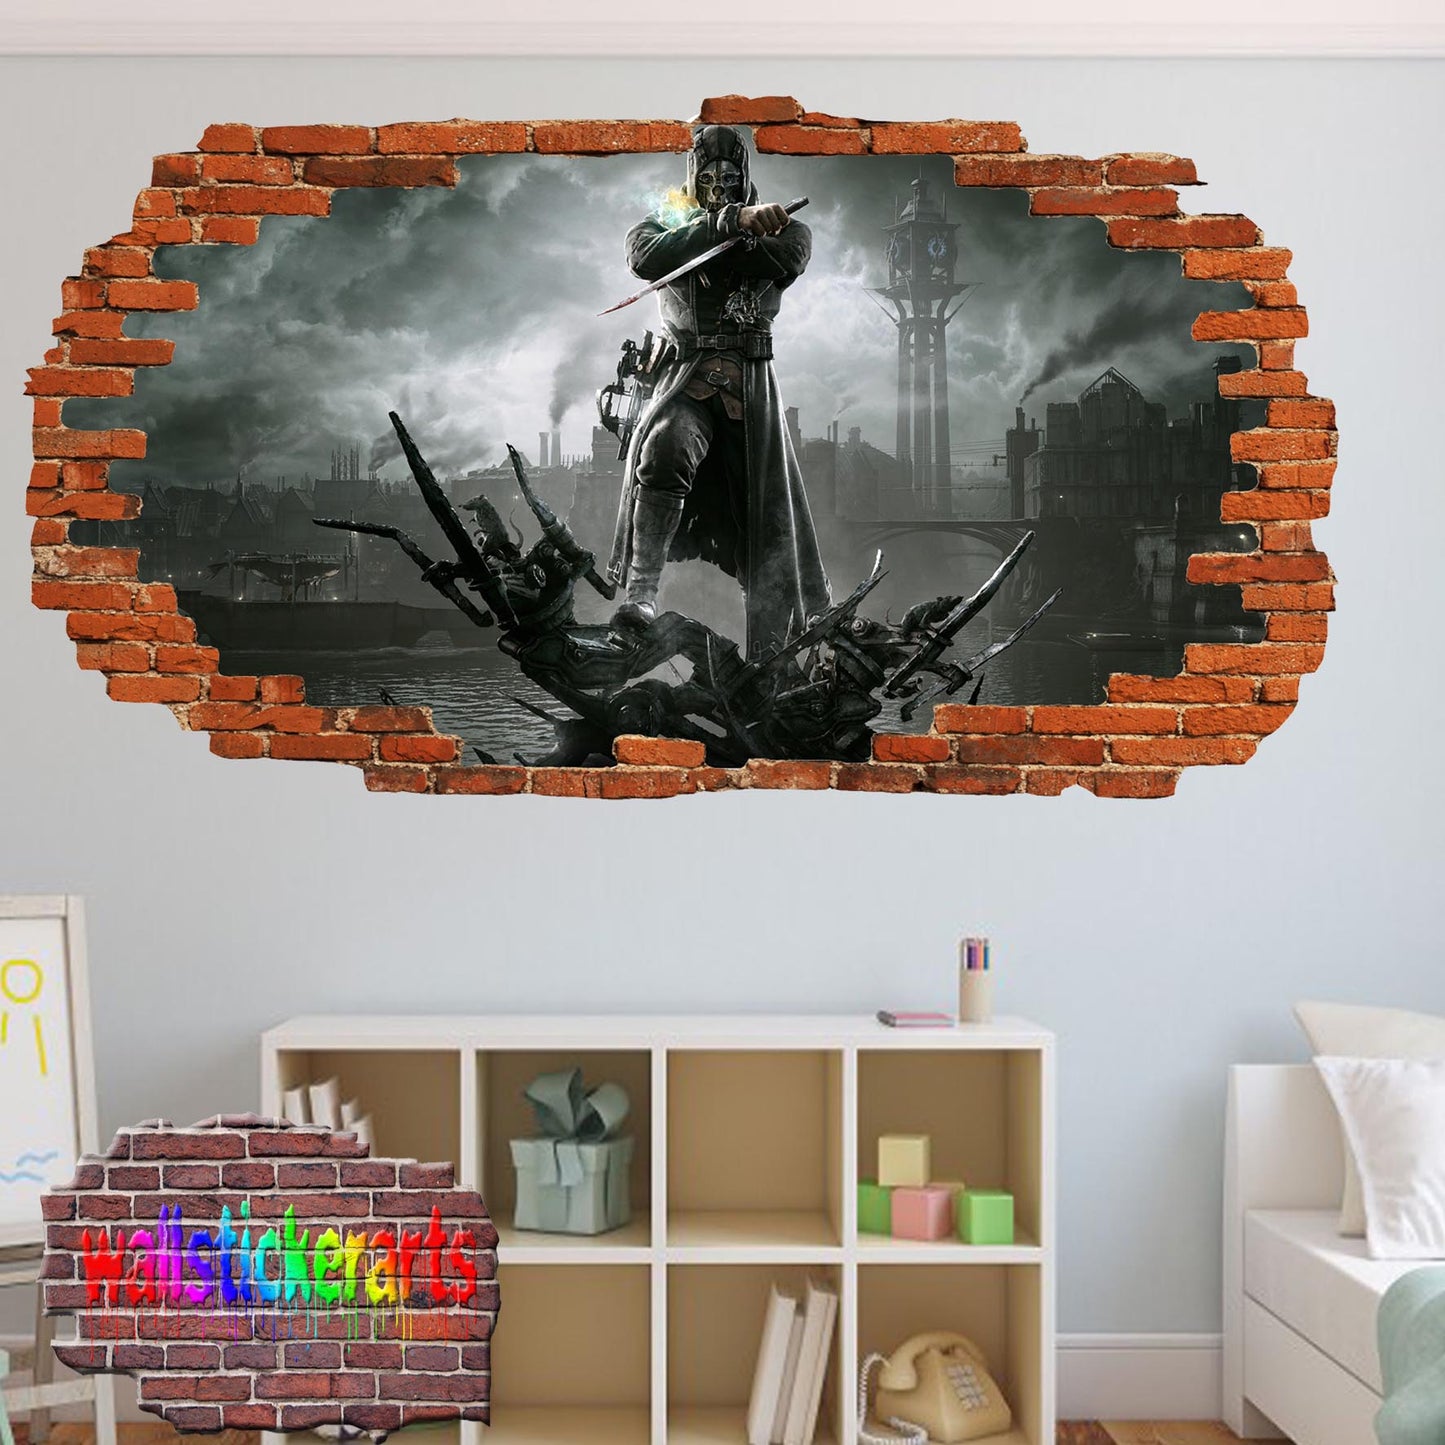 DISHONORED PS XBOX PS4 GAME WALL STICKER MURAL POSTER DECAL